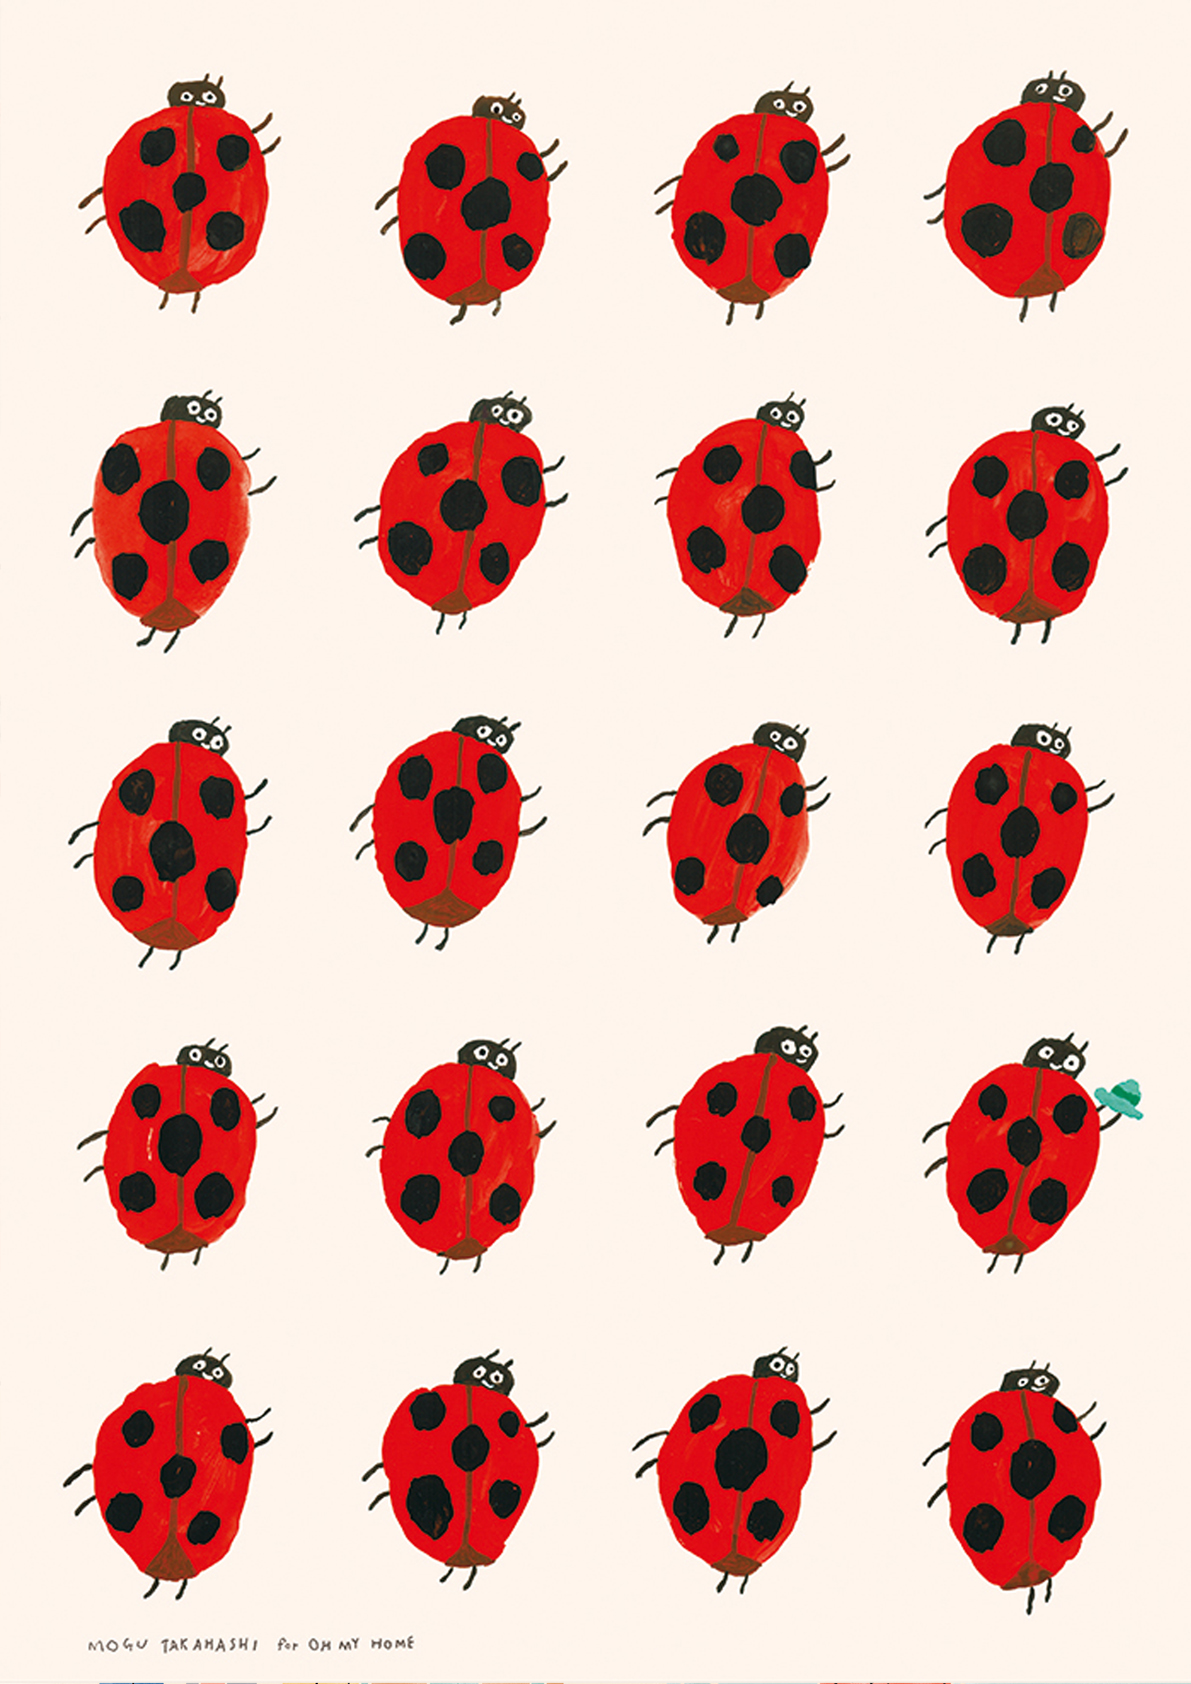 ohmyhome-the-ladybird-and-her-green-hat